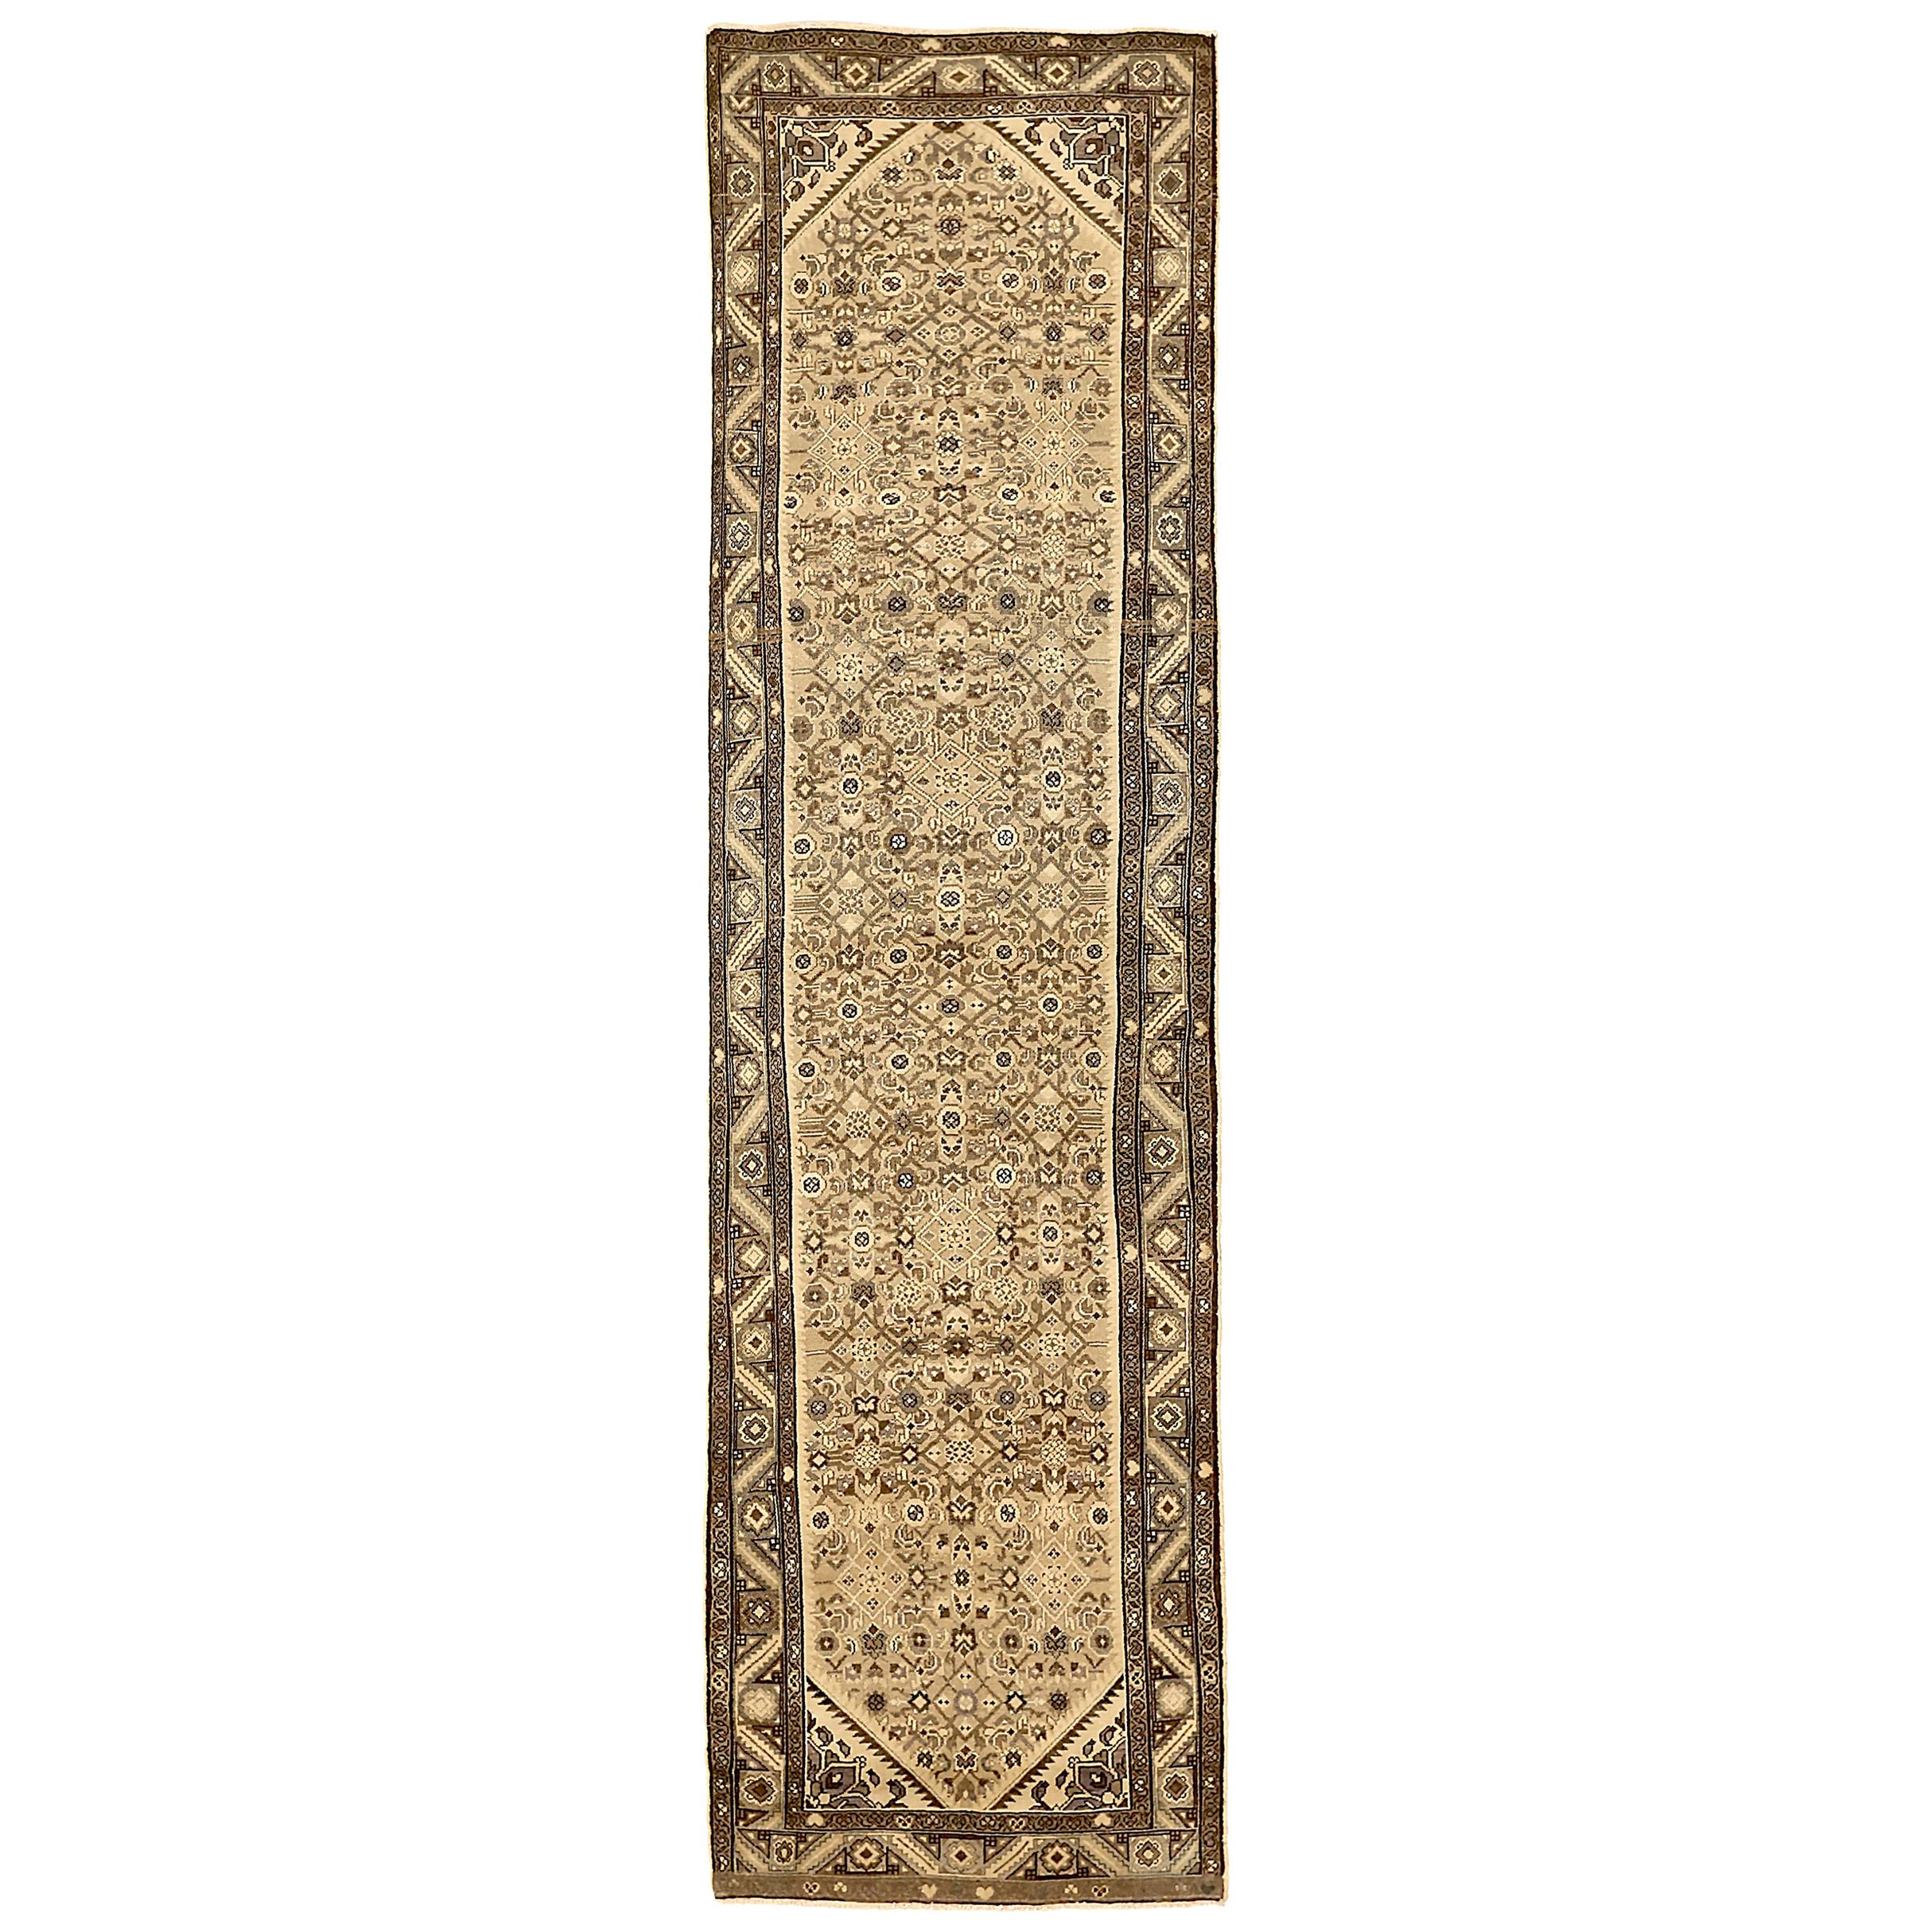 Antique Persian Hamadan Runner Rug with Geometric-Floral Design on Ivory Field For Sale